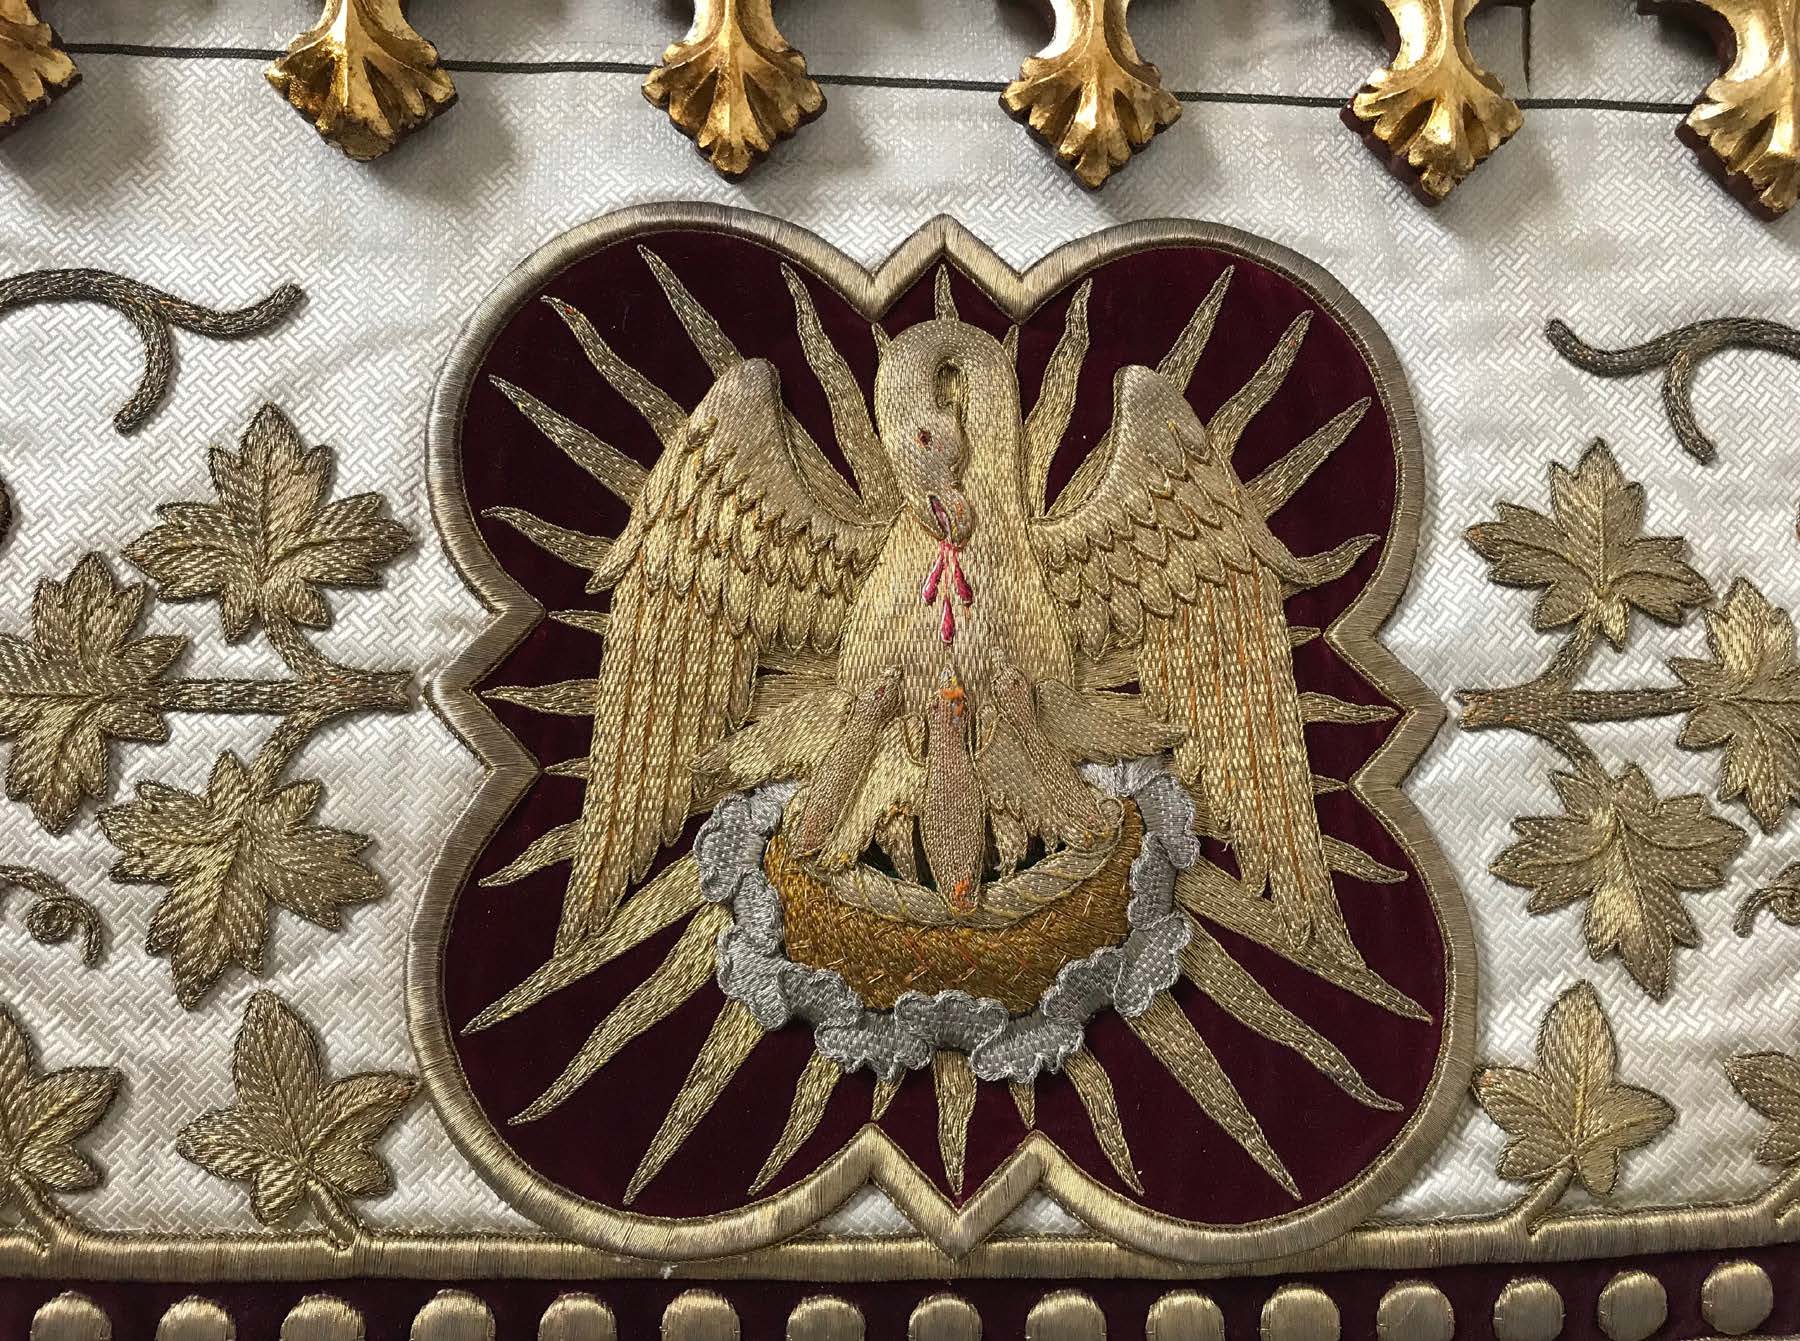 The legend tells how the pelican brought its young back to life by striking its own breast with its beak. Sint-Niklaaskerk, embroidery on processional canopy. Veurne, Belgium.